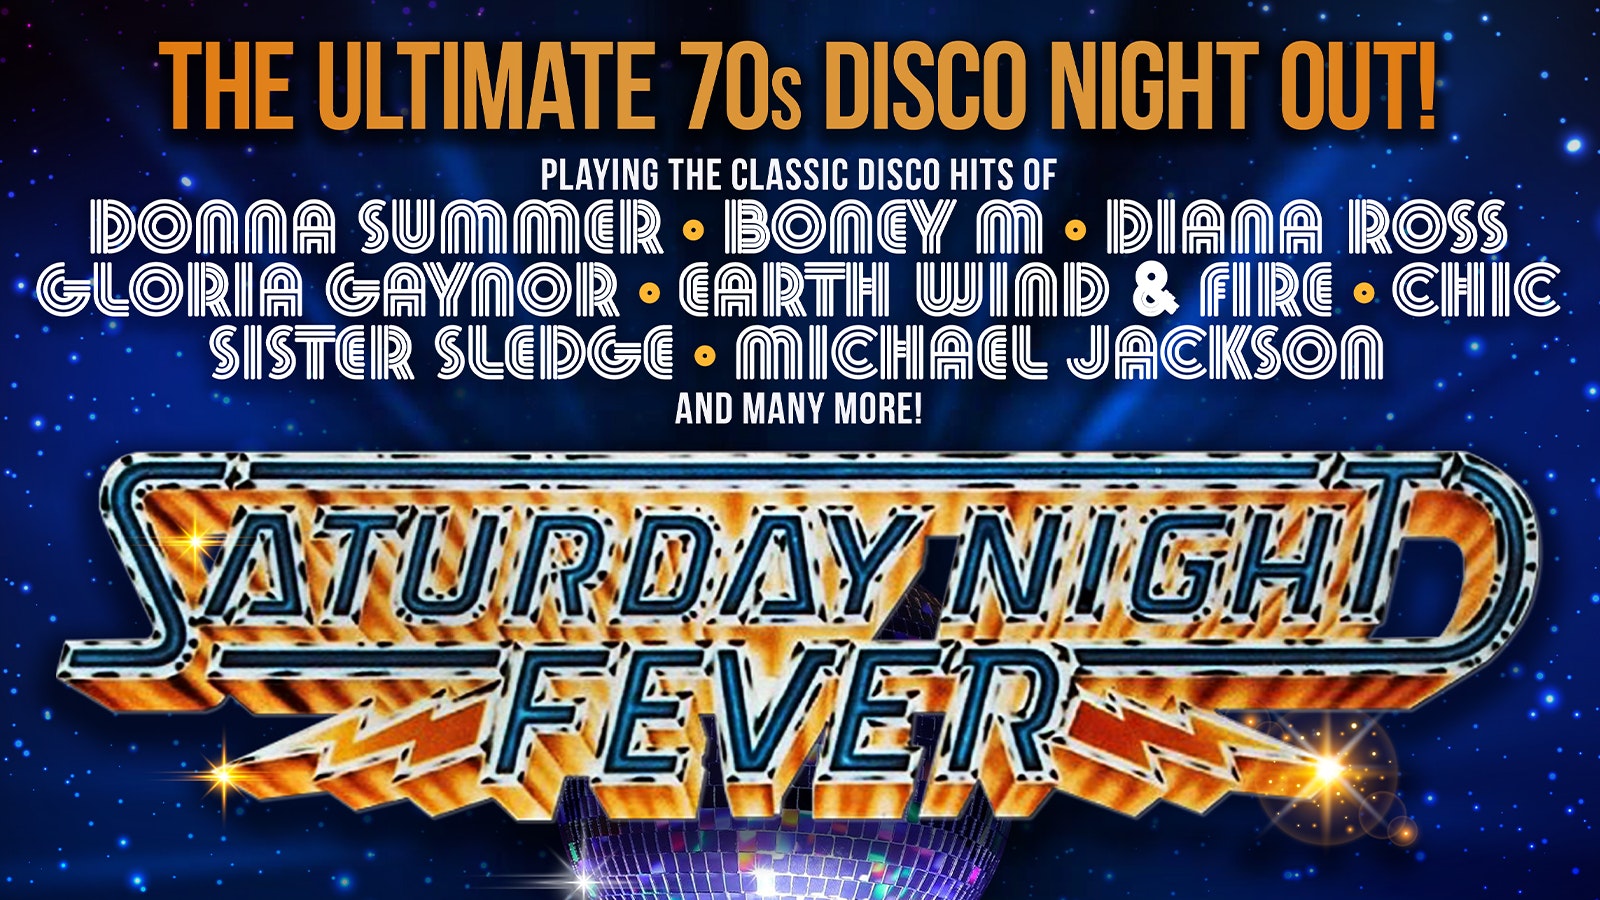 🕺 Saturday Night Fever – The Ultimate 70s Disco Night Out –  plus Bee Gees tribute band Stayin’ Alive